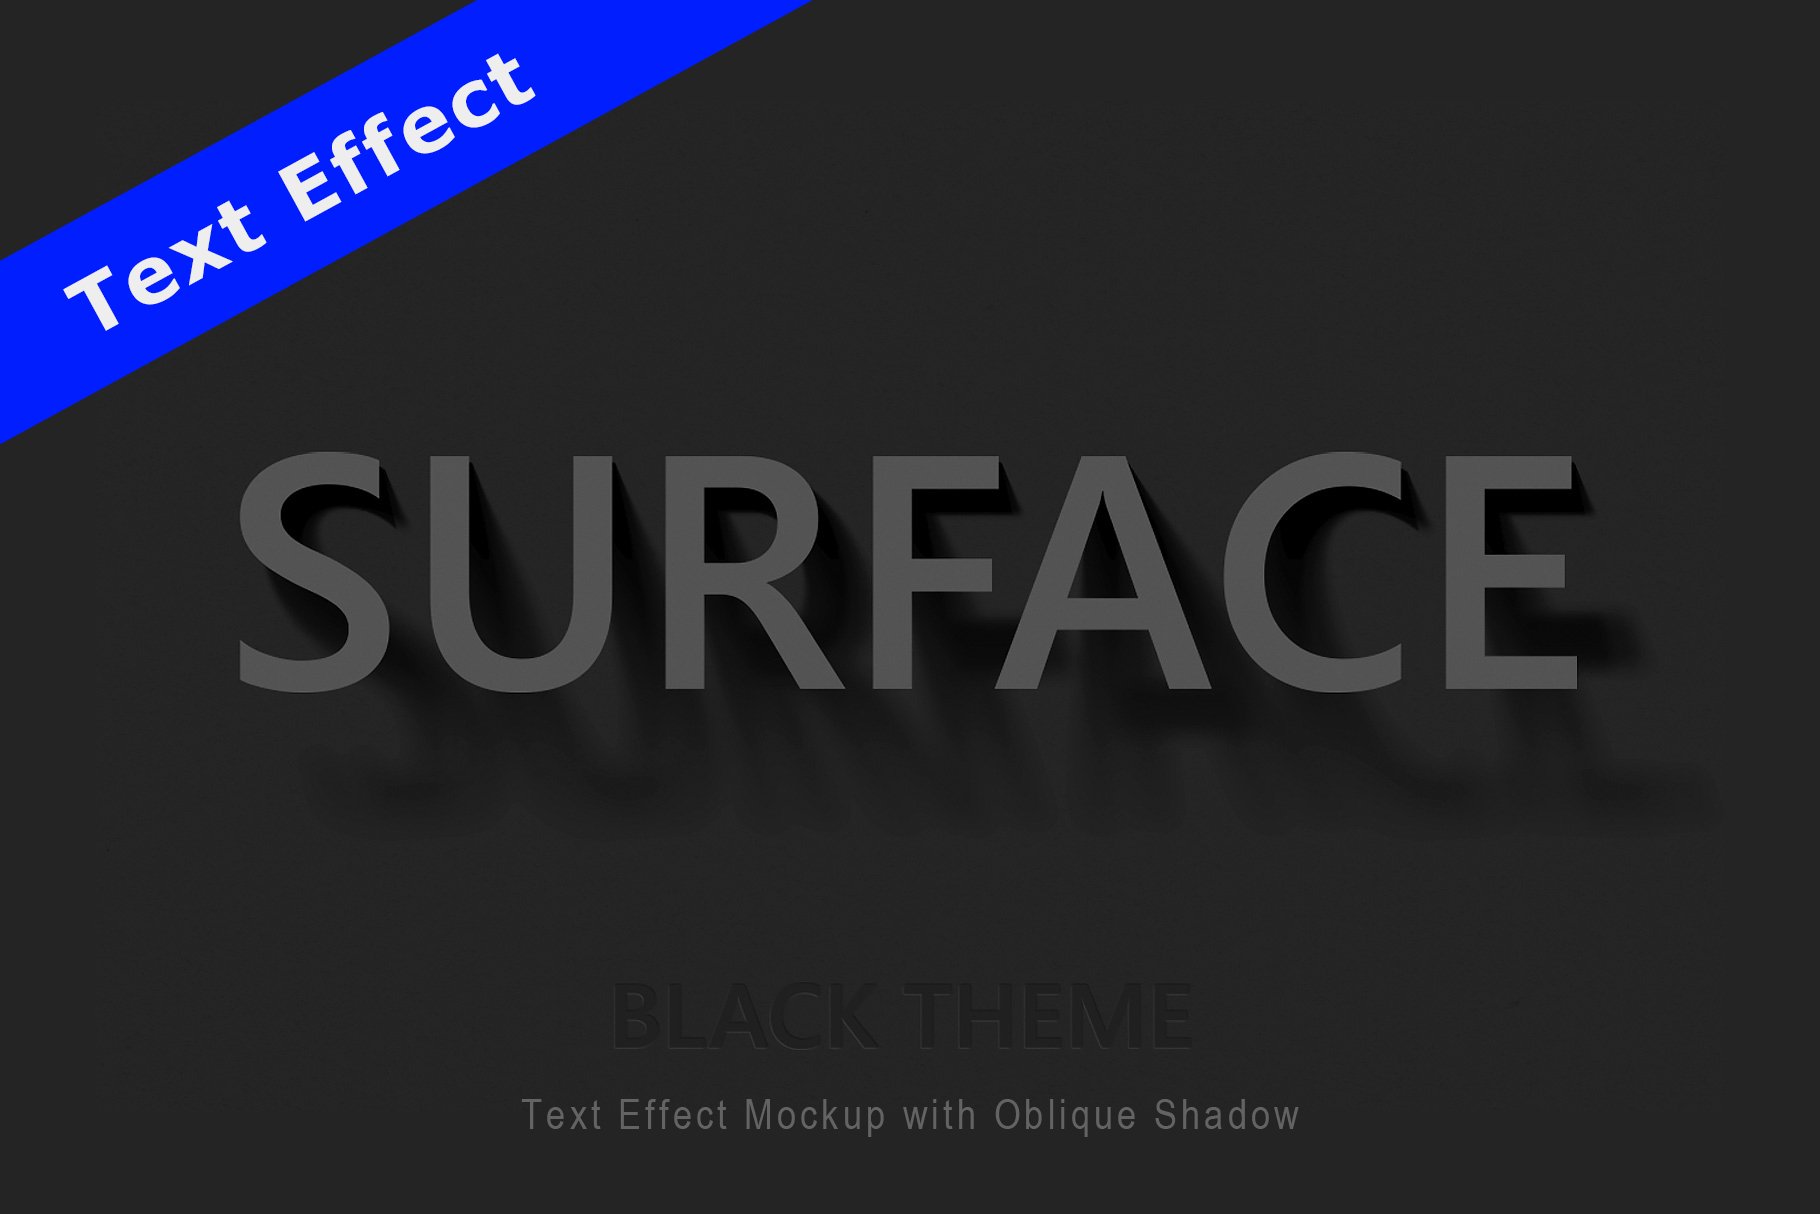 Text Effect with Oblique Shadowcover image.